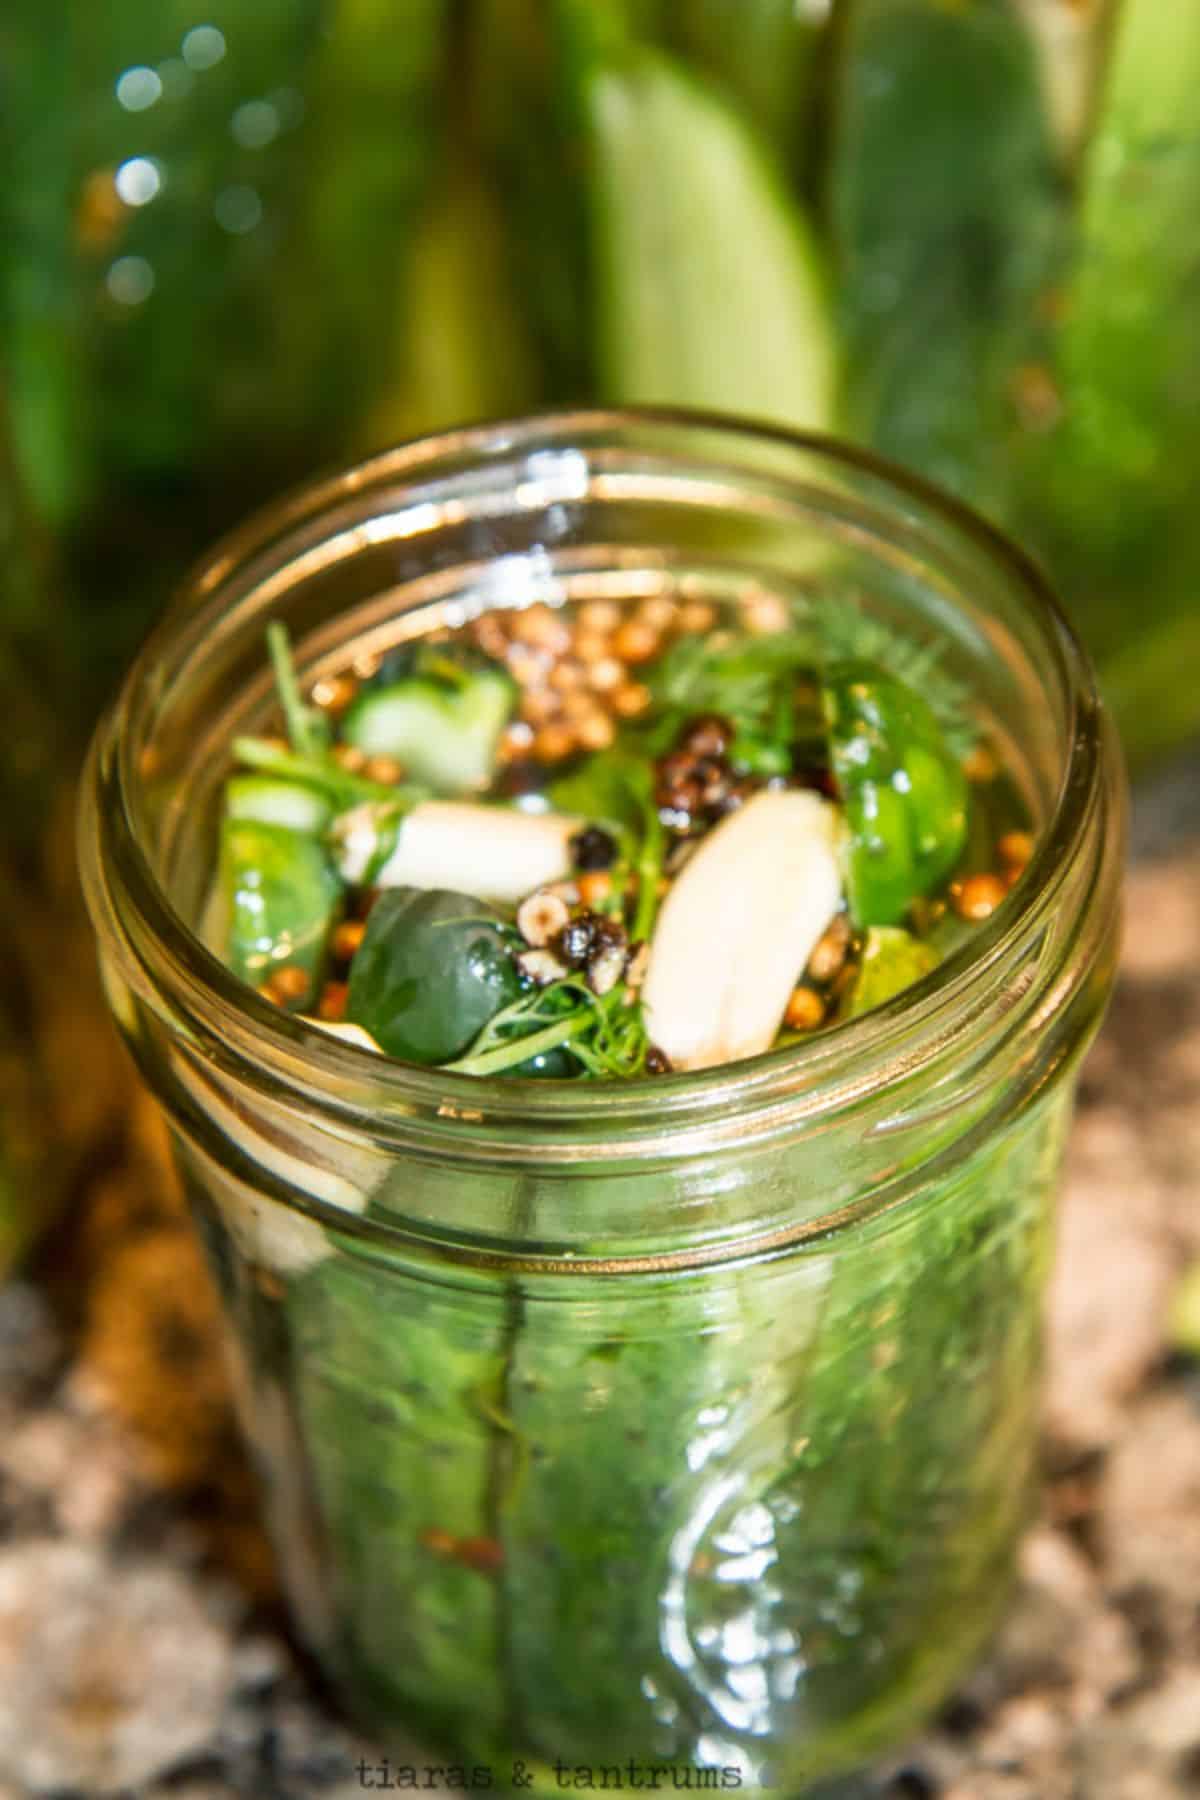 Ultimate classic kosher dill pickles in a glass jar.